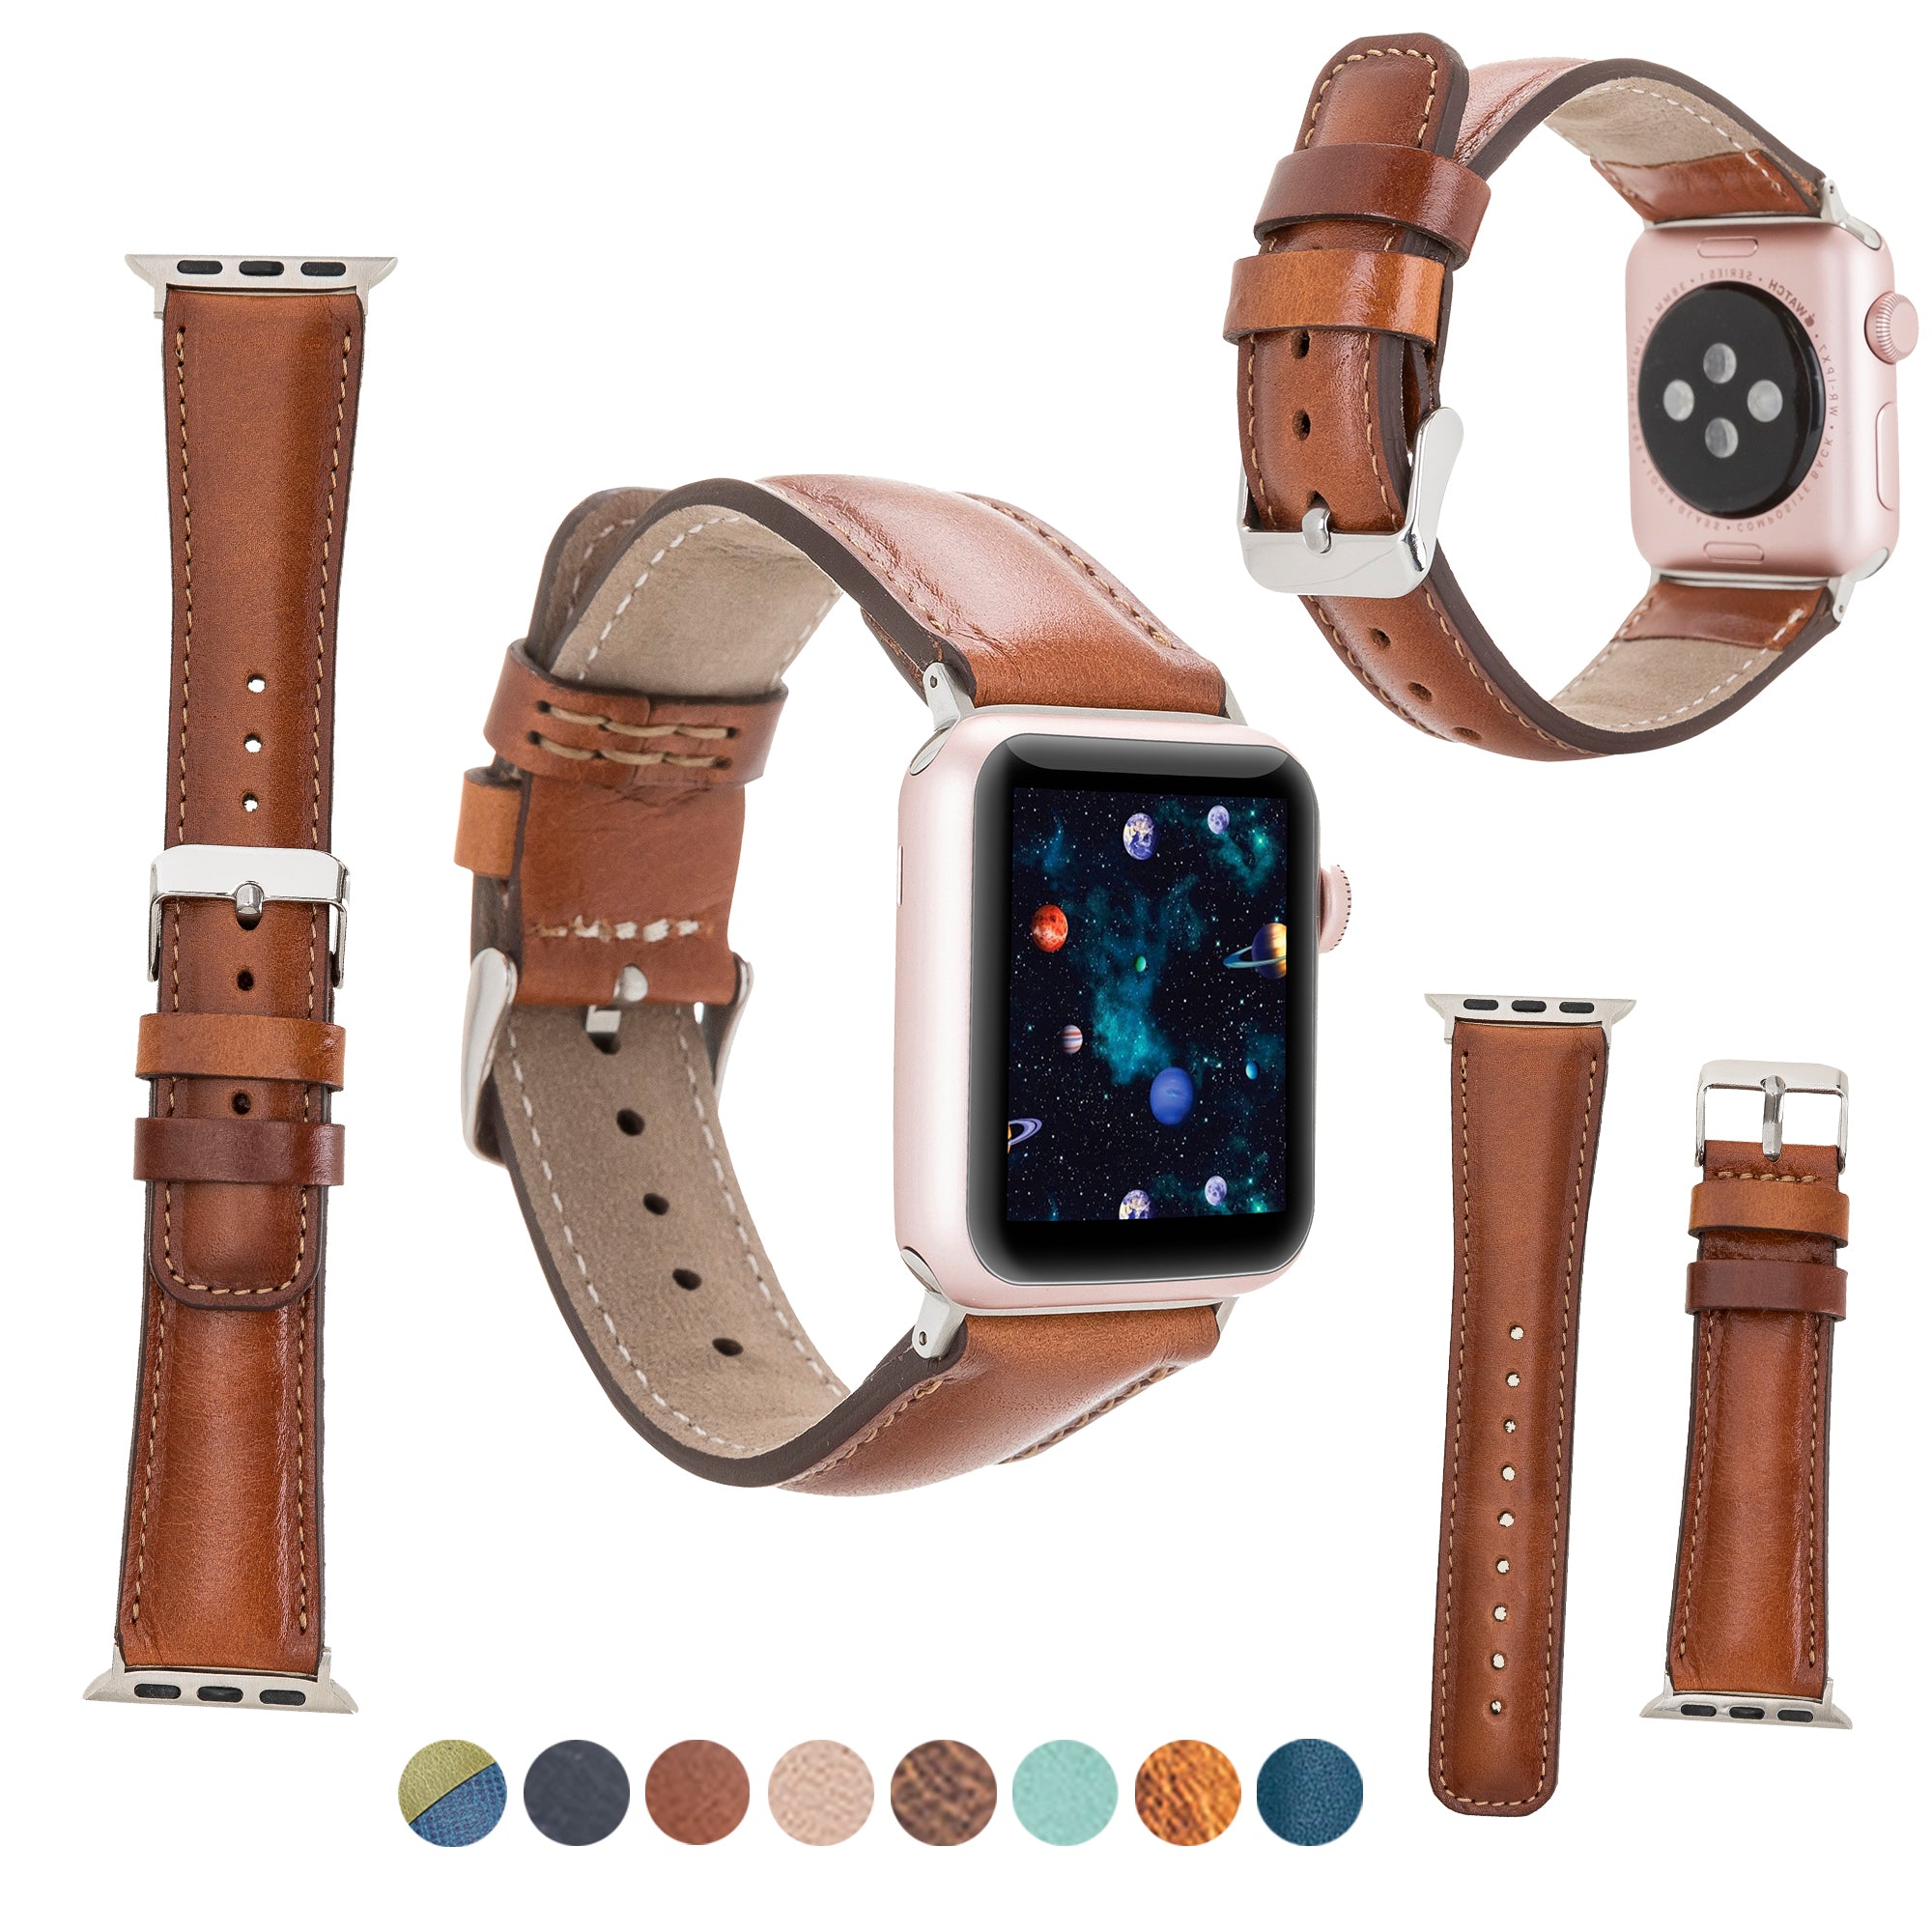 LupinnyLeather Liverpool Collection Leather Watch Band for Apple & Fitbit Versa Watch Band 21